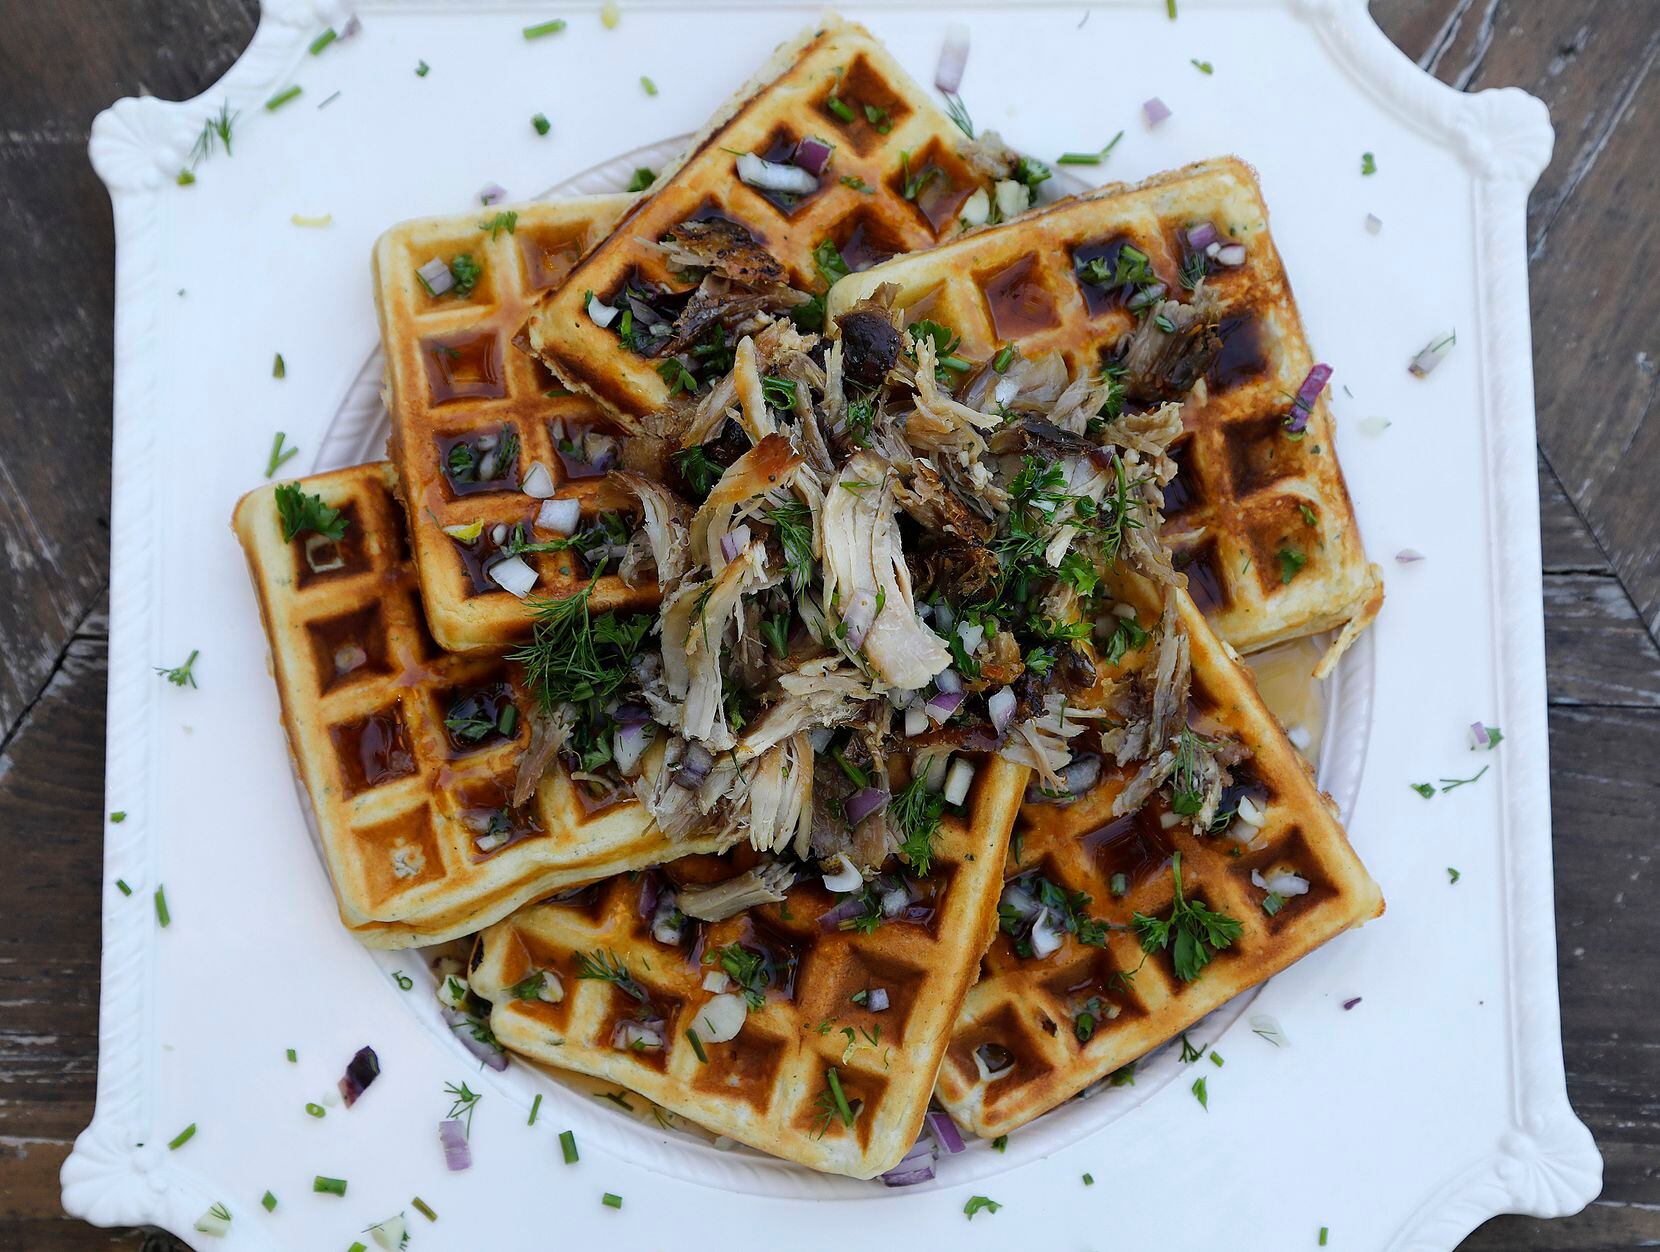 Ranched Waffles With Pulled Pork and Bourbon Maple Syrup (Stewart F. House/Special Contributor)